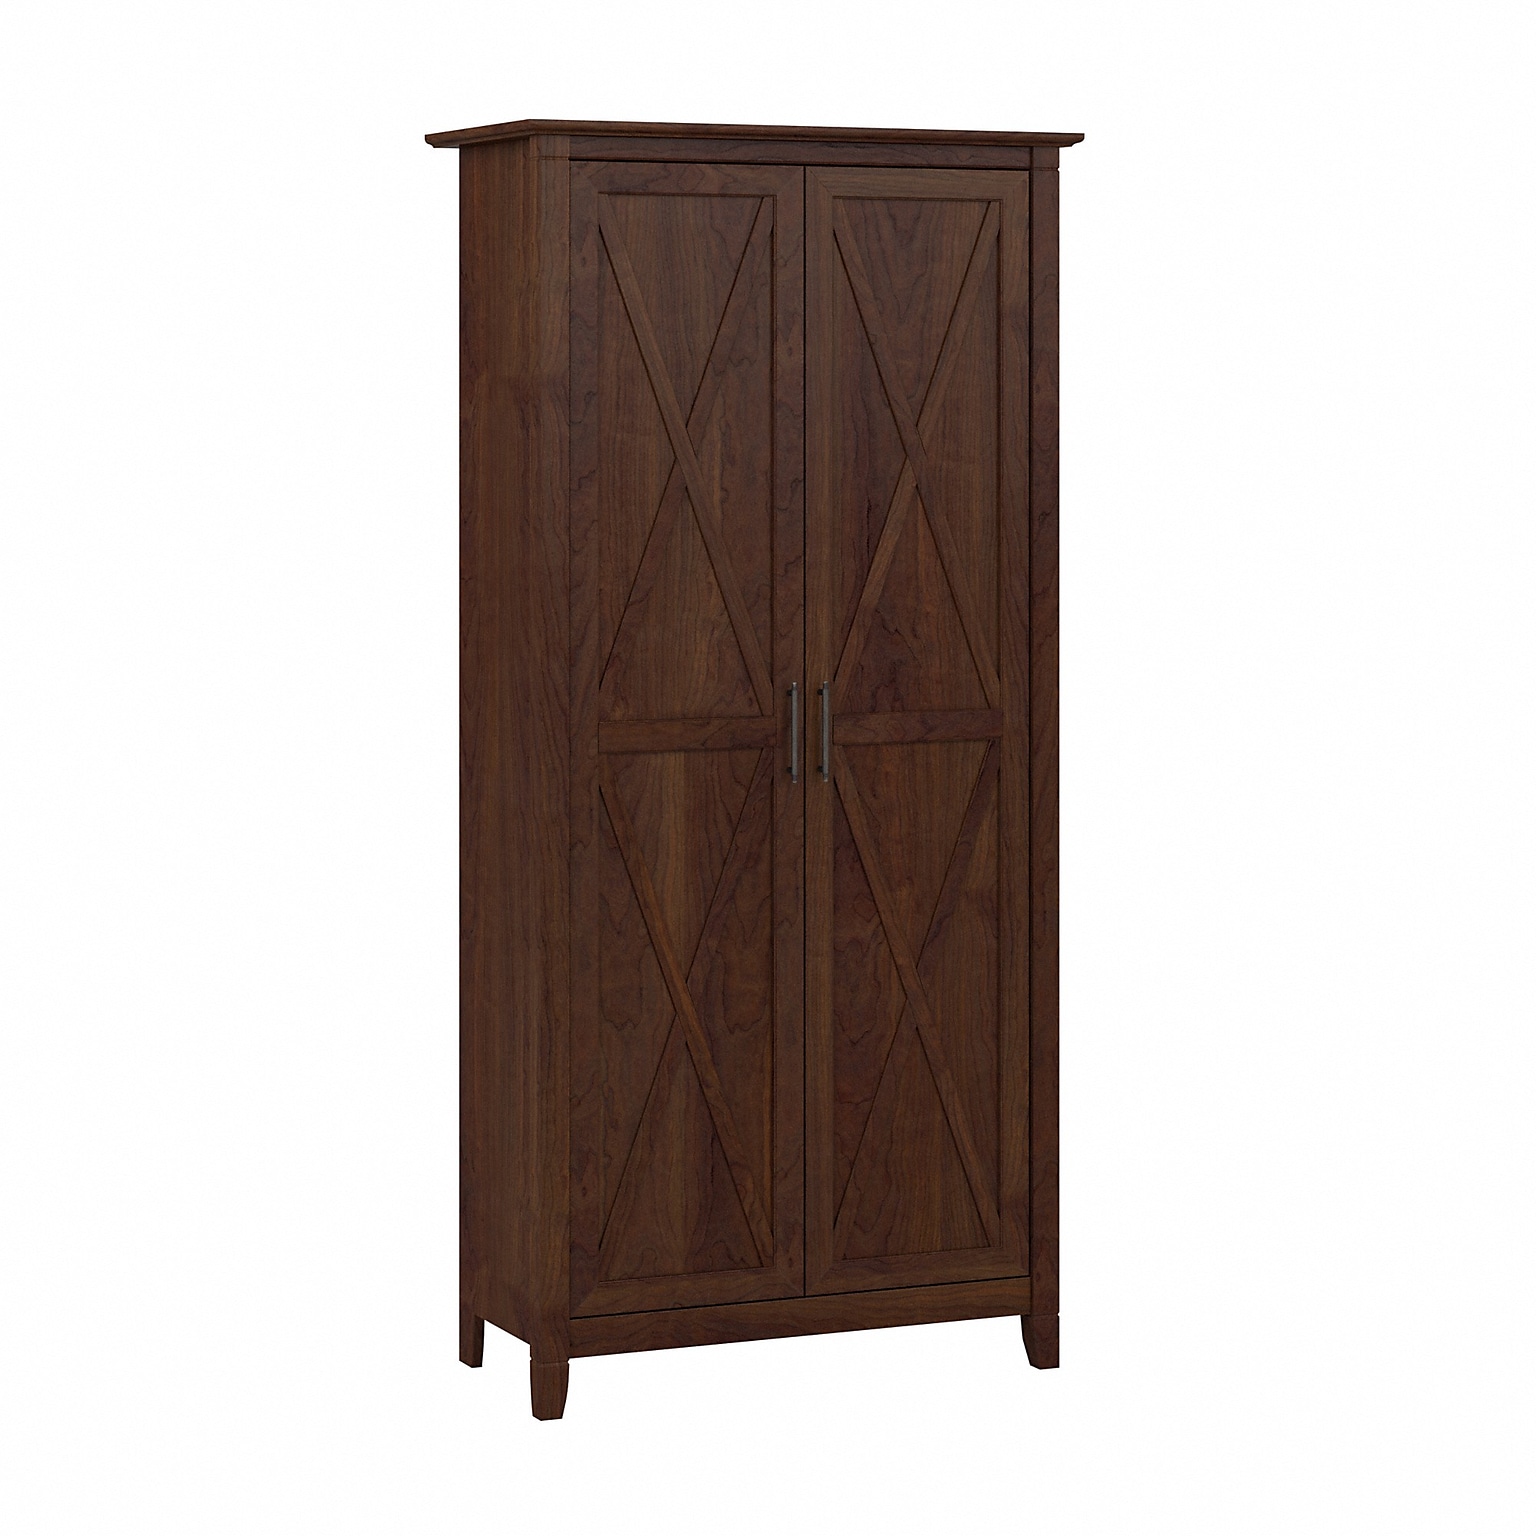 Bush Furniture Key West 65.98 Tall Storage Cabinet with Doors and 5 Shelves, Bing Cherry (KWS266BC-03)